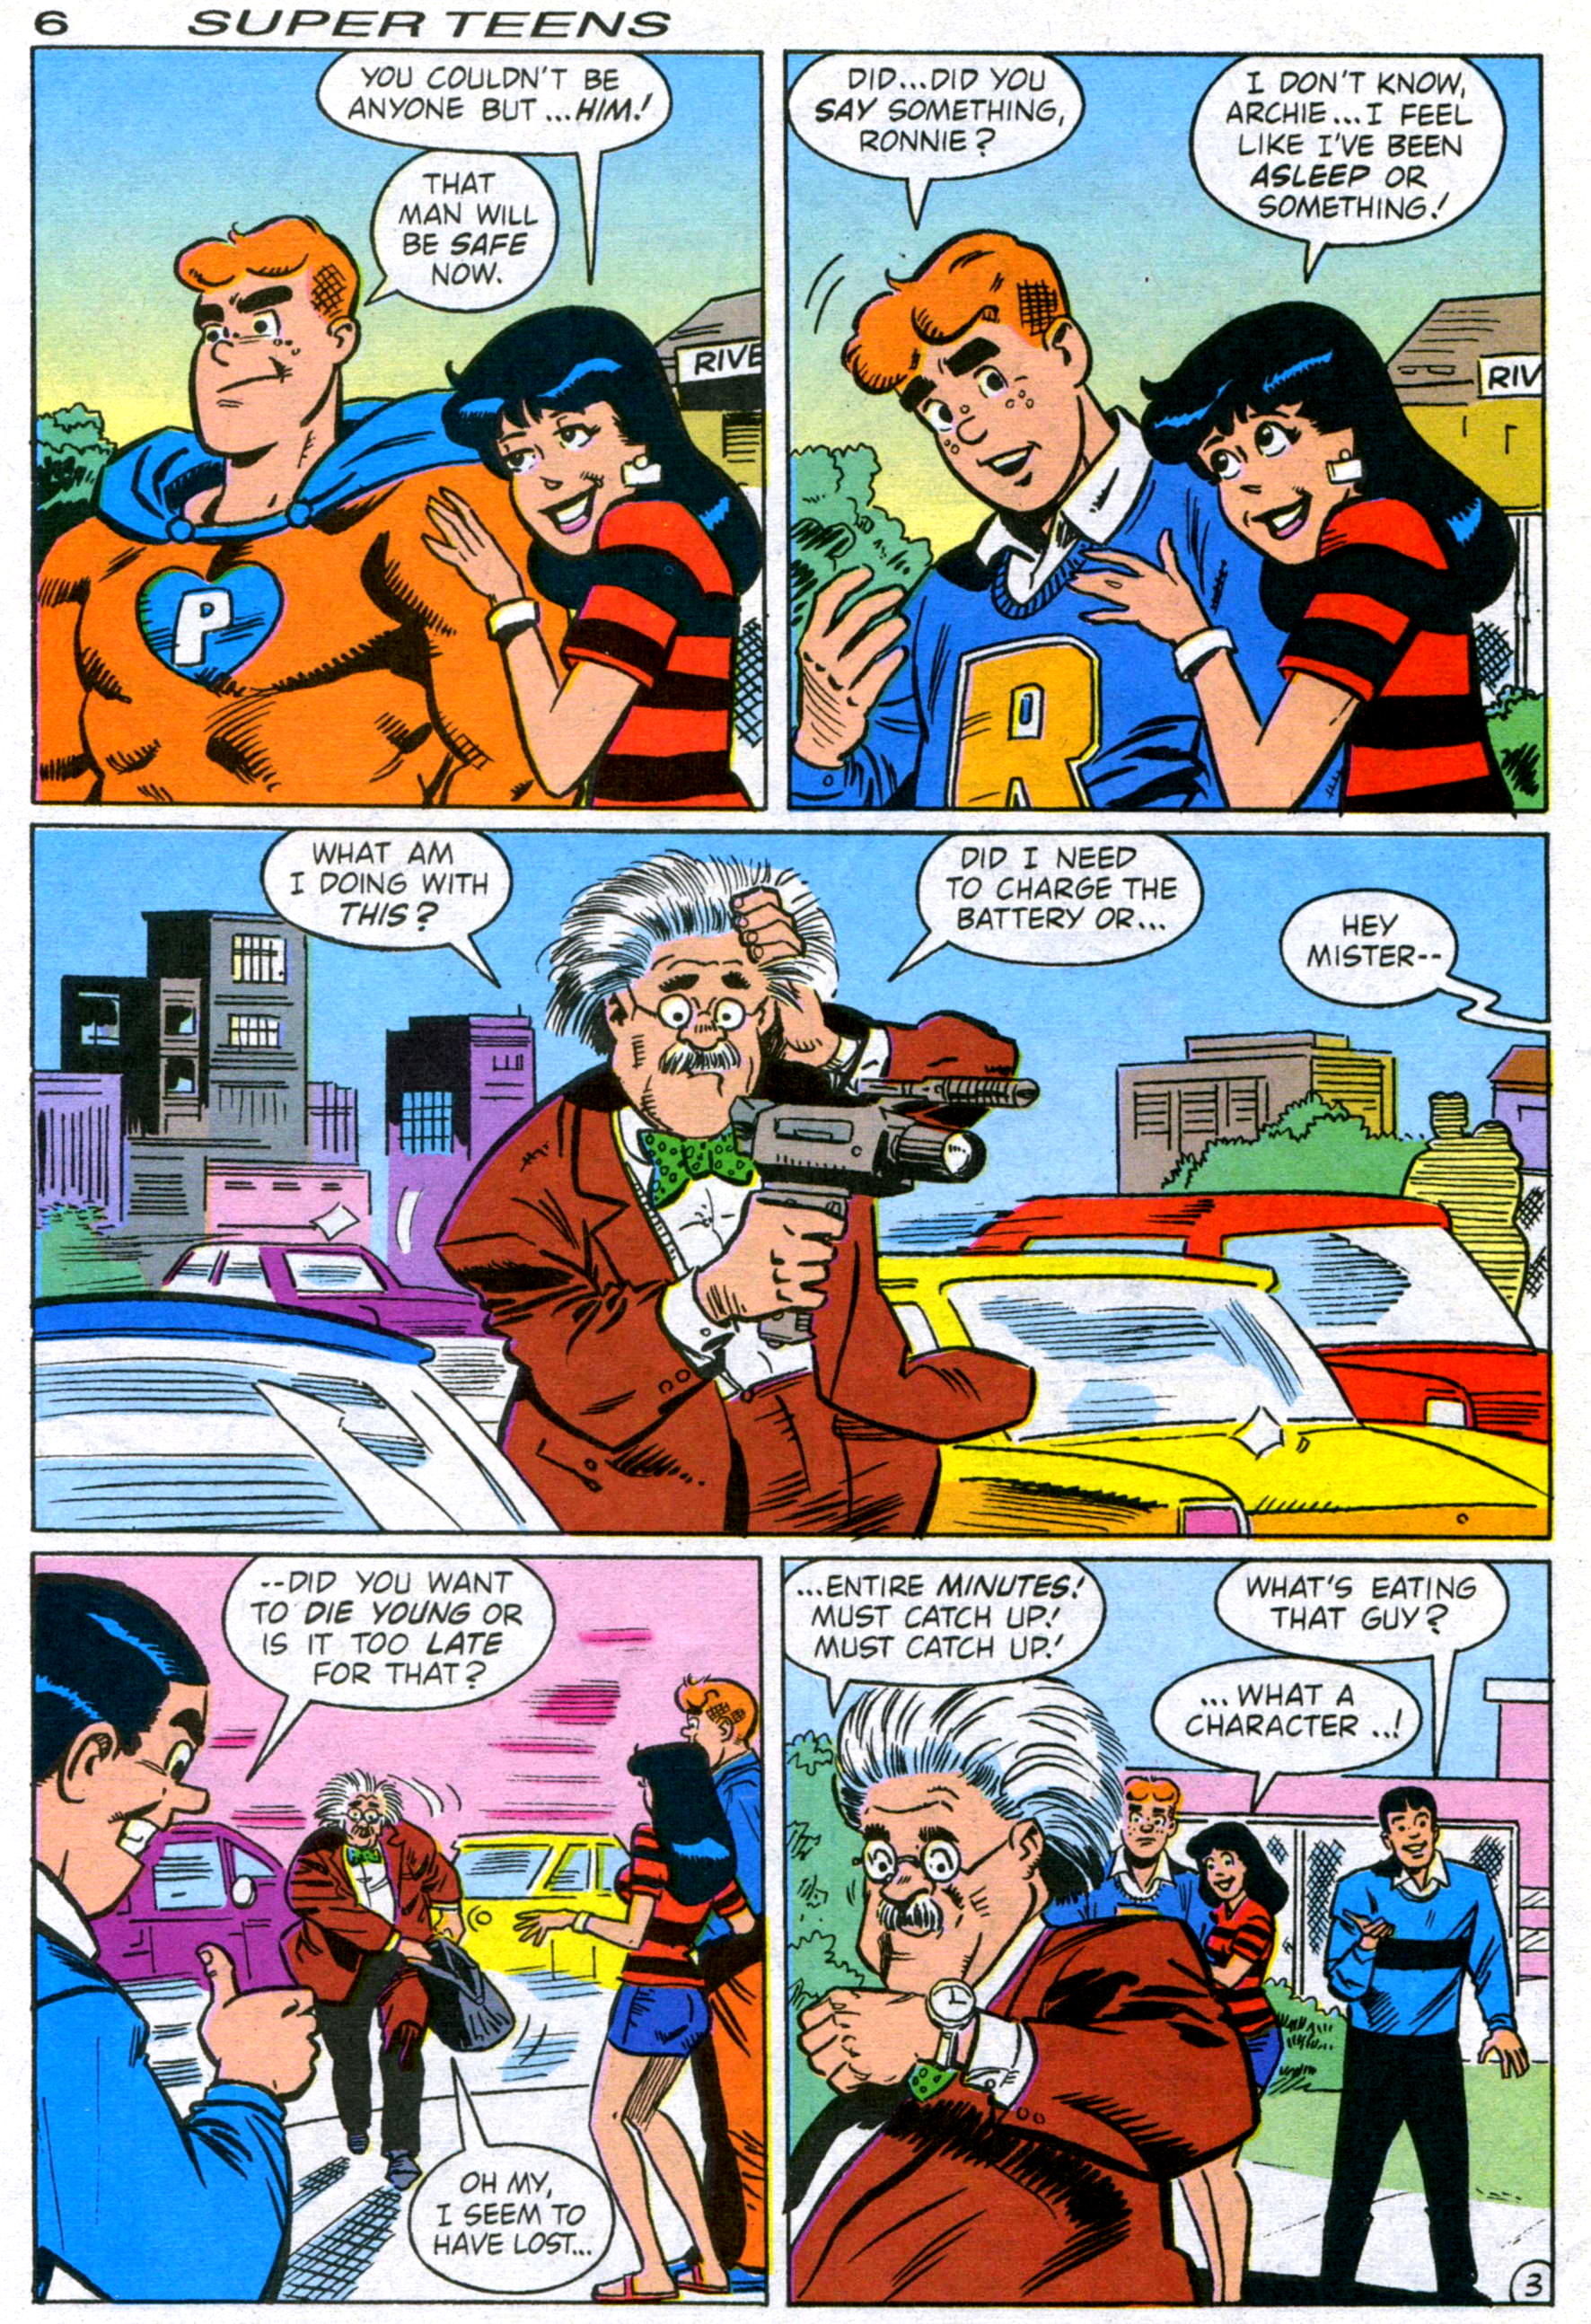 Read online Archie's Super Teens comic -  Issue #1 - 8